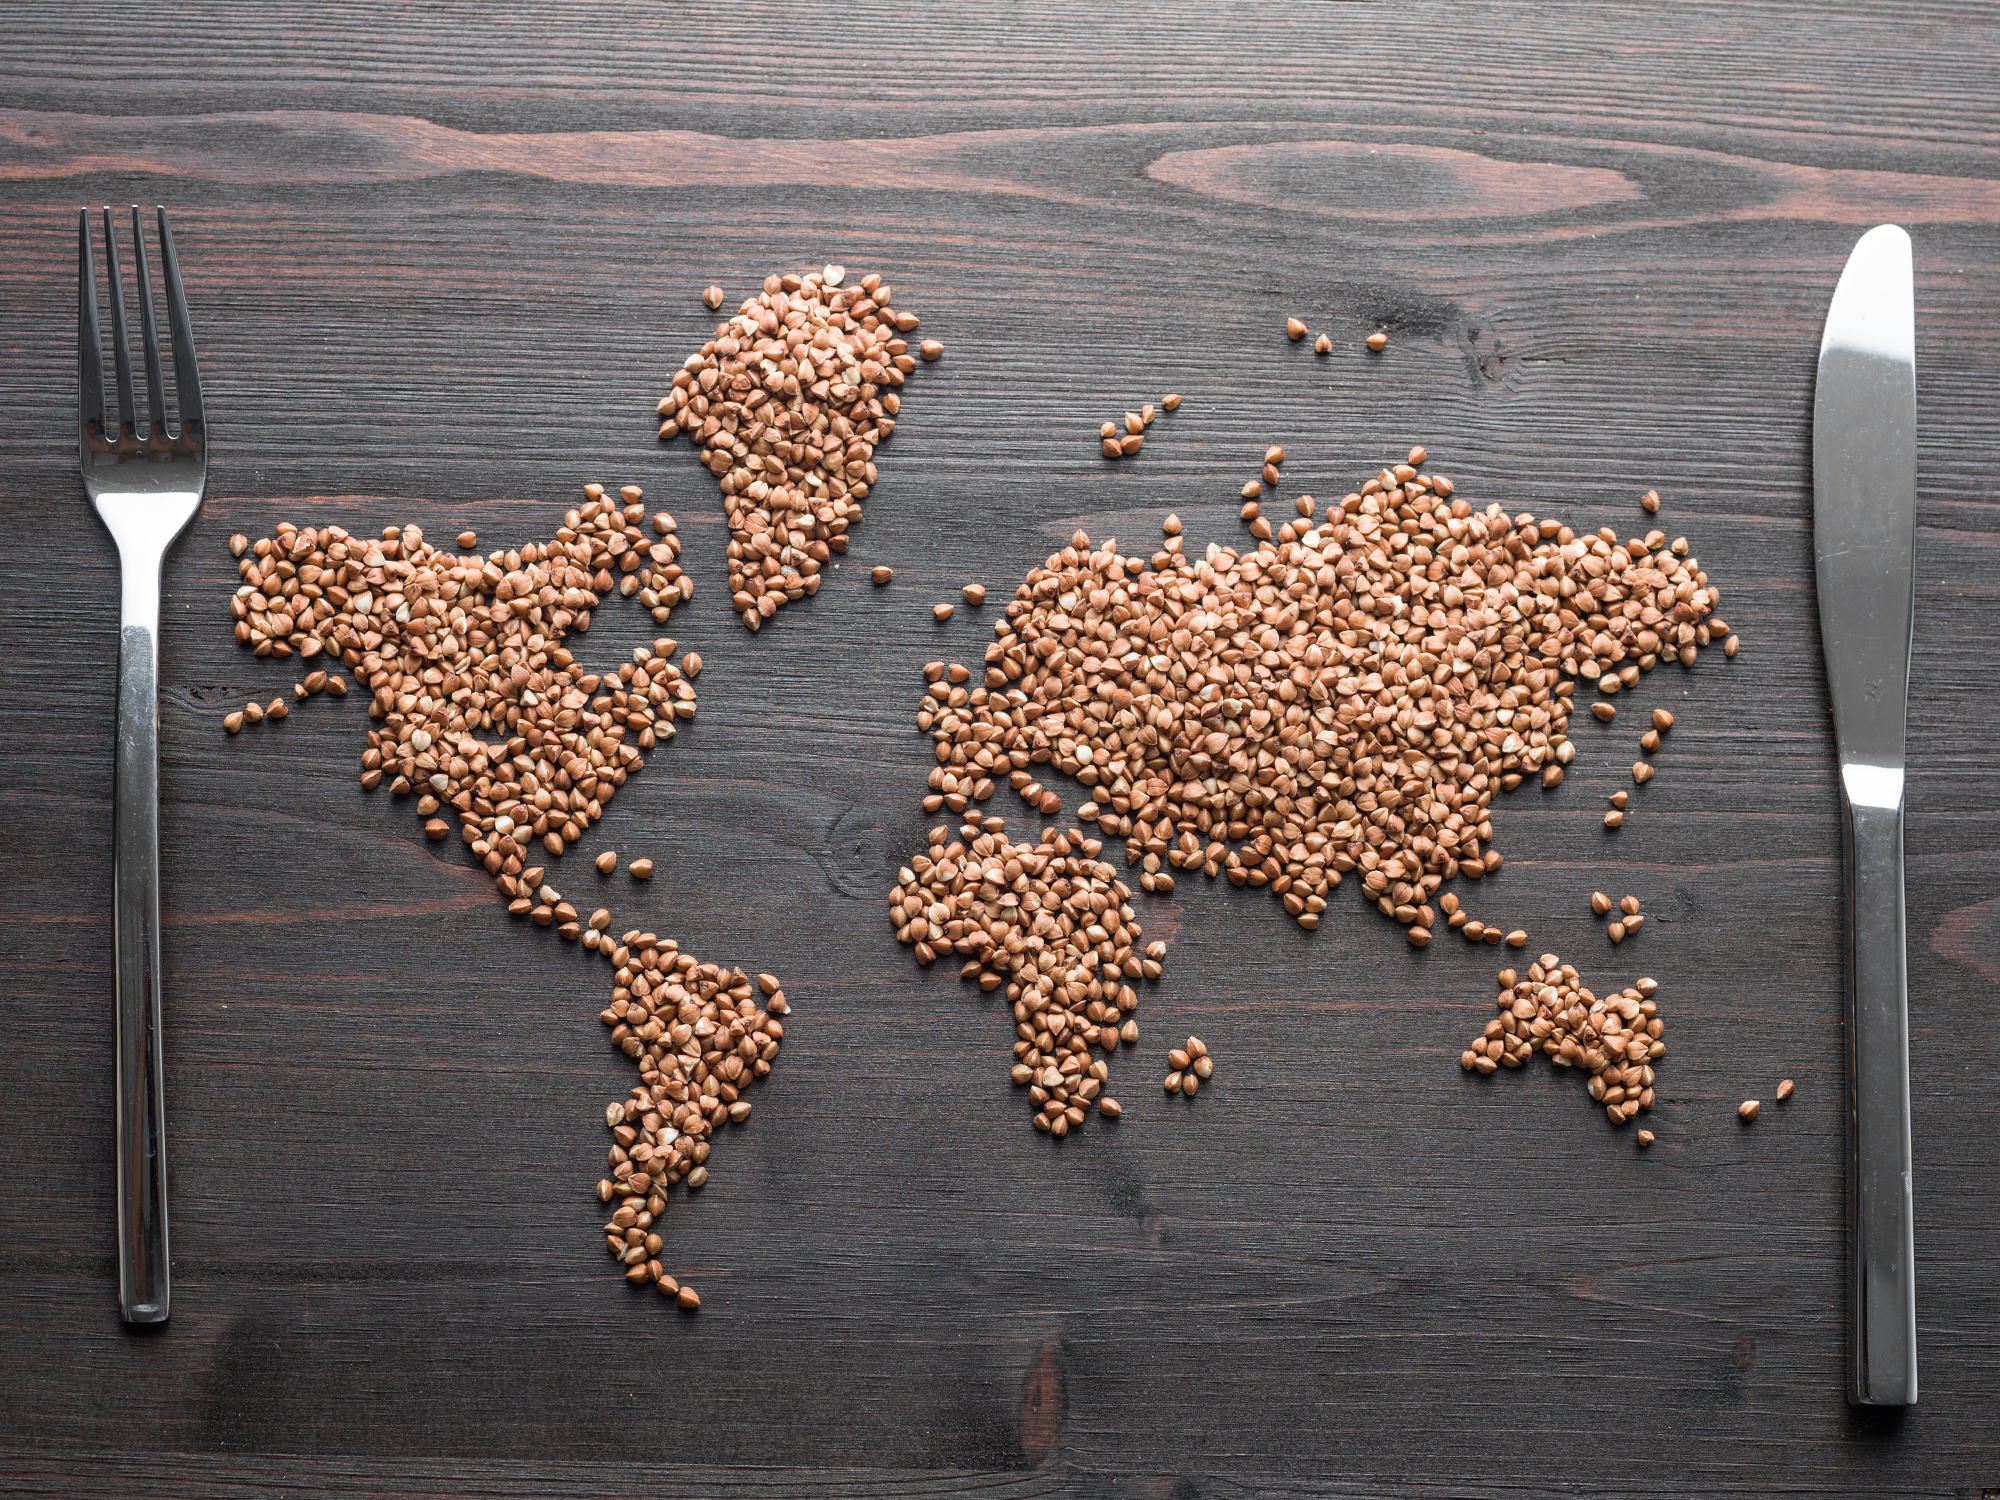 World map made of grains (4:3)